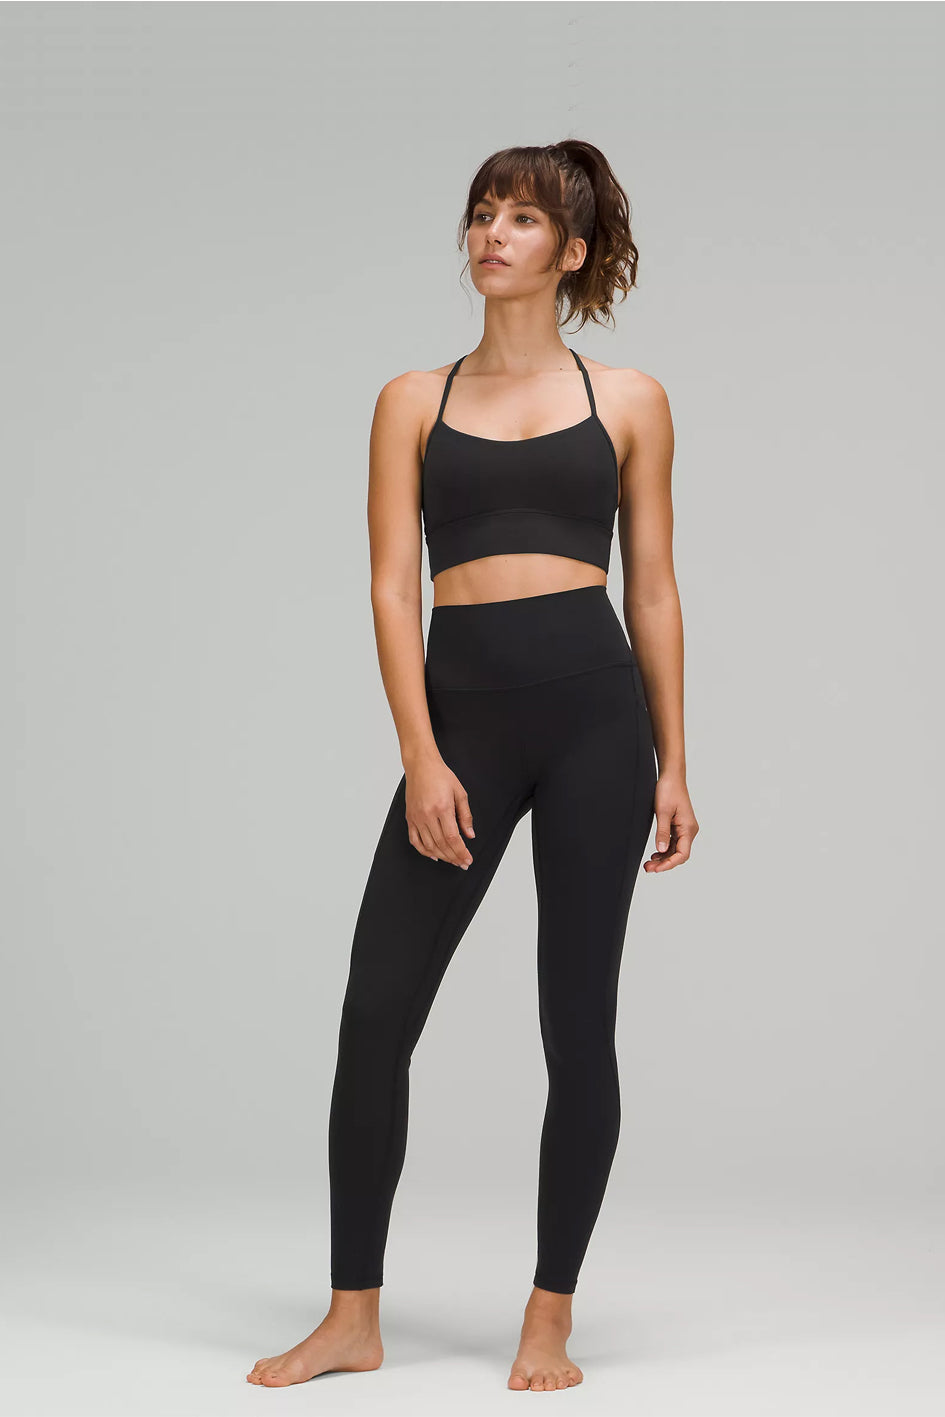 Bootylicious – Pineapple Athleisure